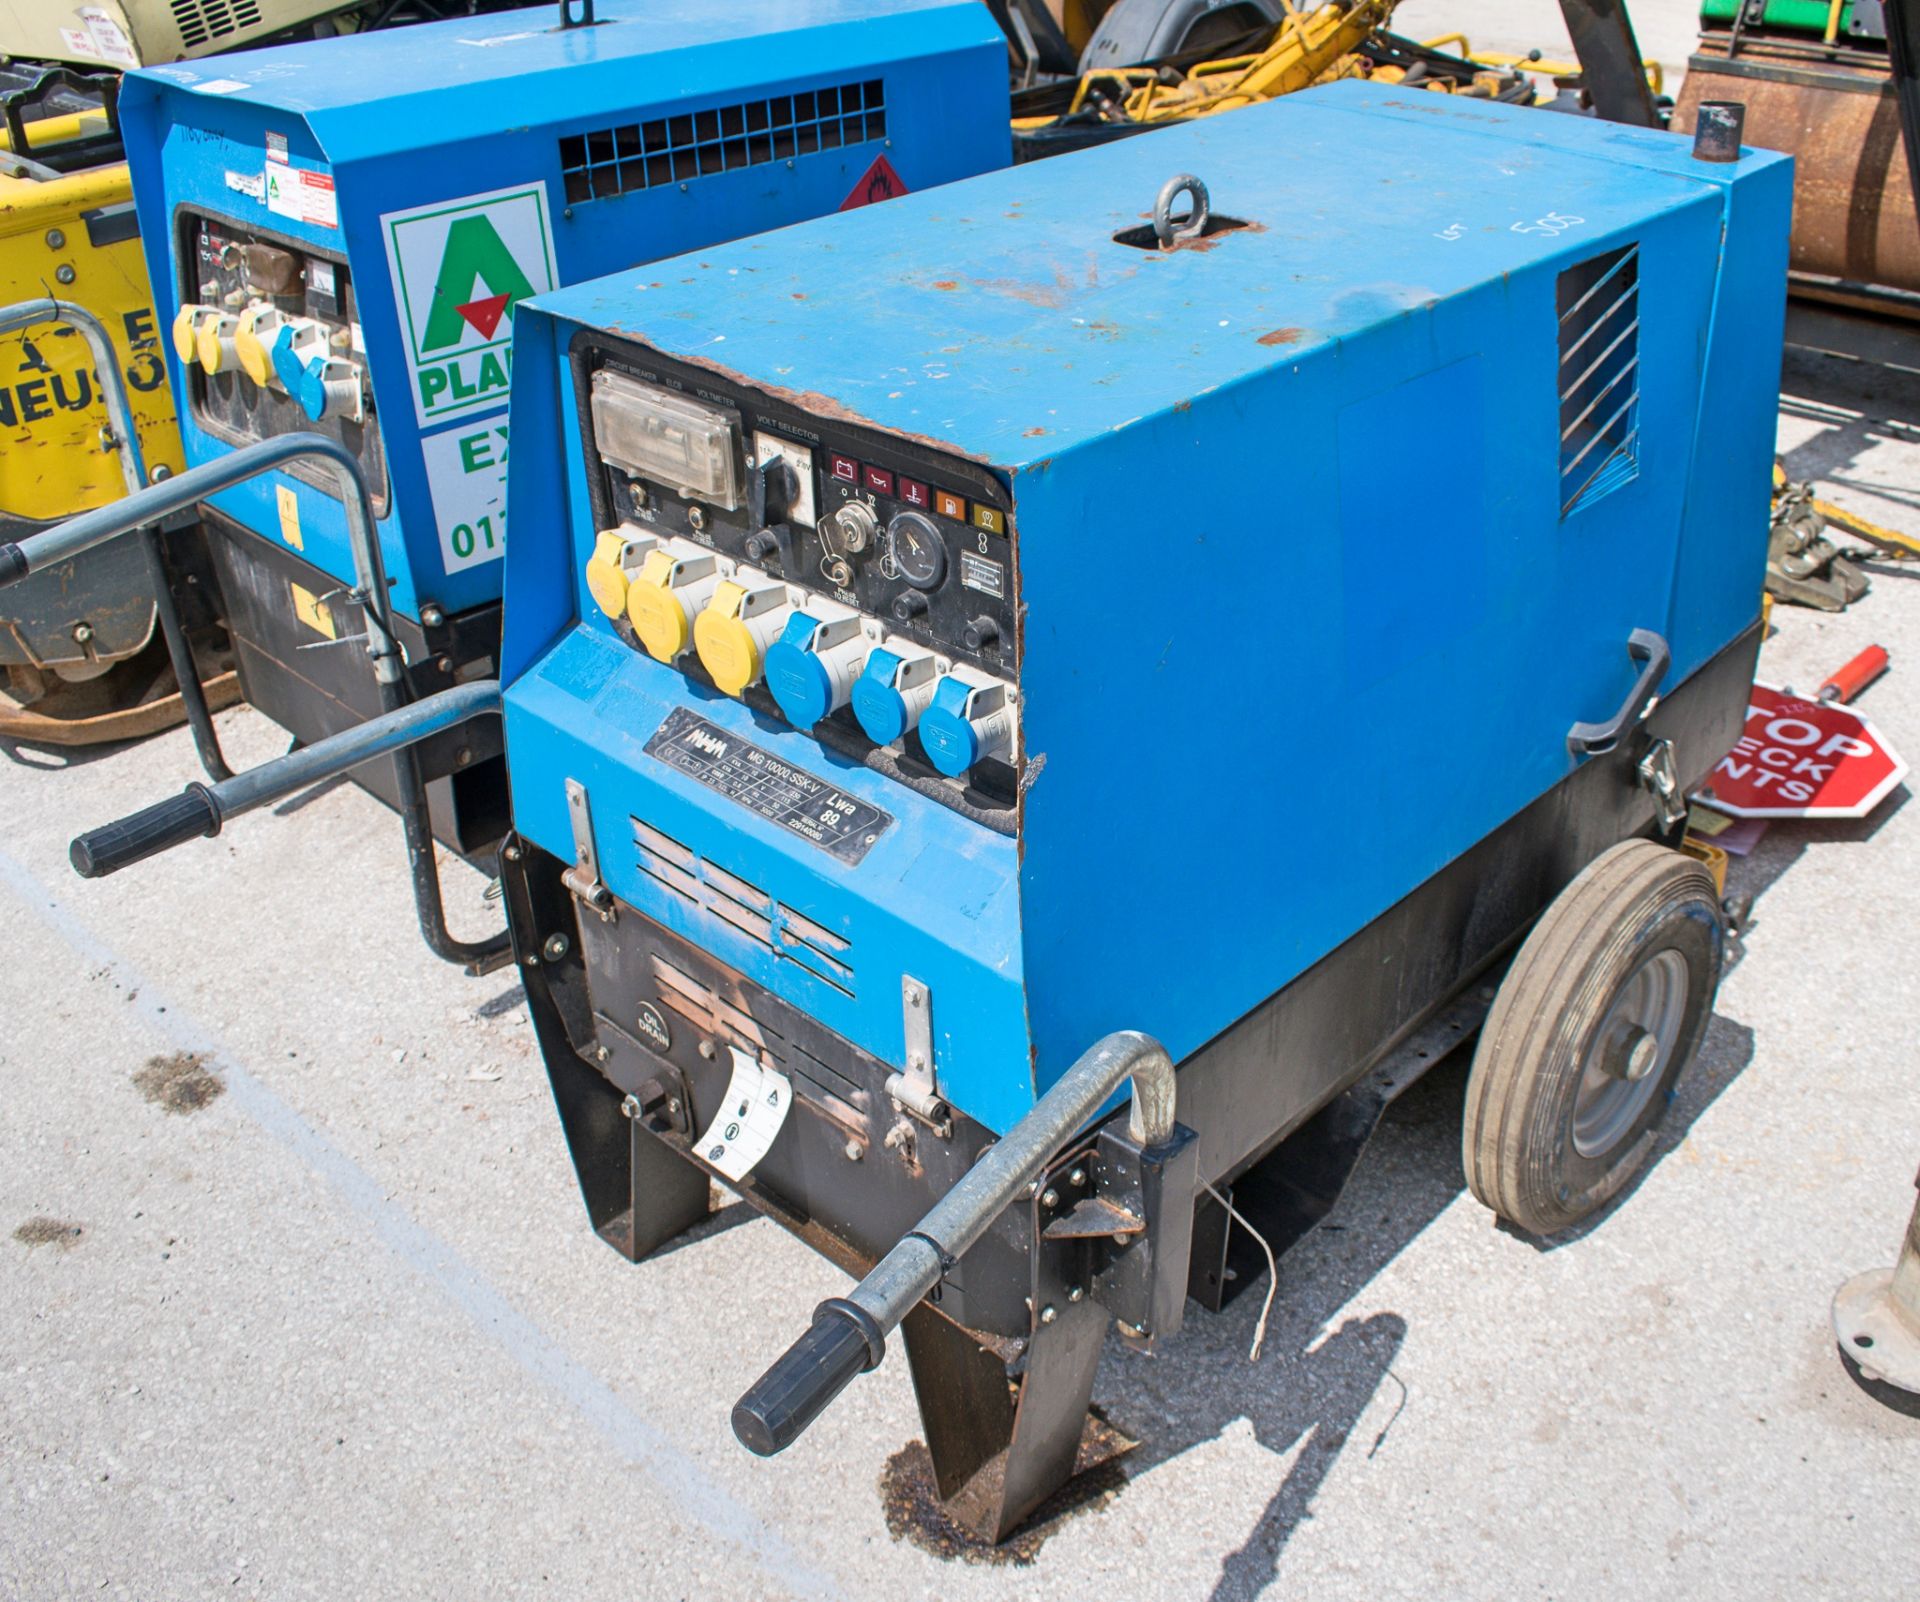 MHM MG 10000 10 kva diesel driven generator Recorded Hours: 4535 A669605